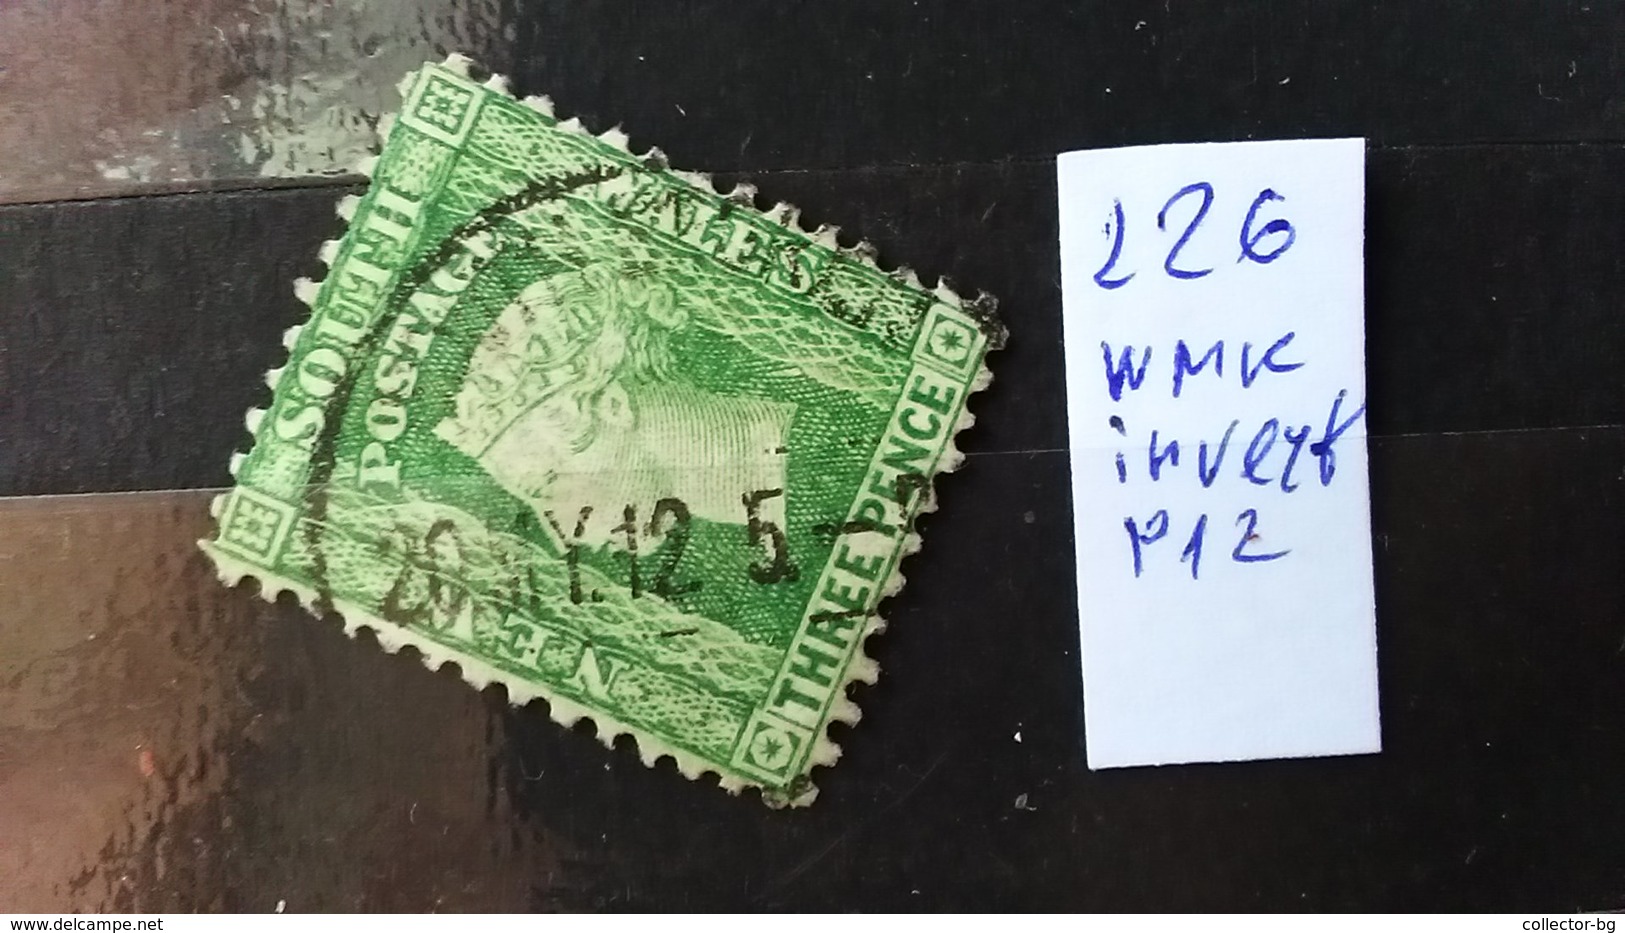 RRR RARE 3 THREE PENCE GREEN NEW SOUTH WALES AUSTRALIA QUEEN VICTORIA ERROR WMK INVERT 226 P12 NO SEE OTHER STAMP TIMBRE - Nuevos